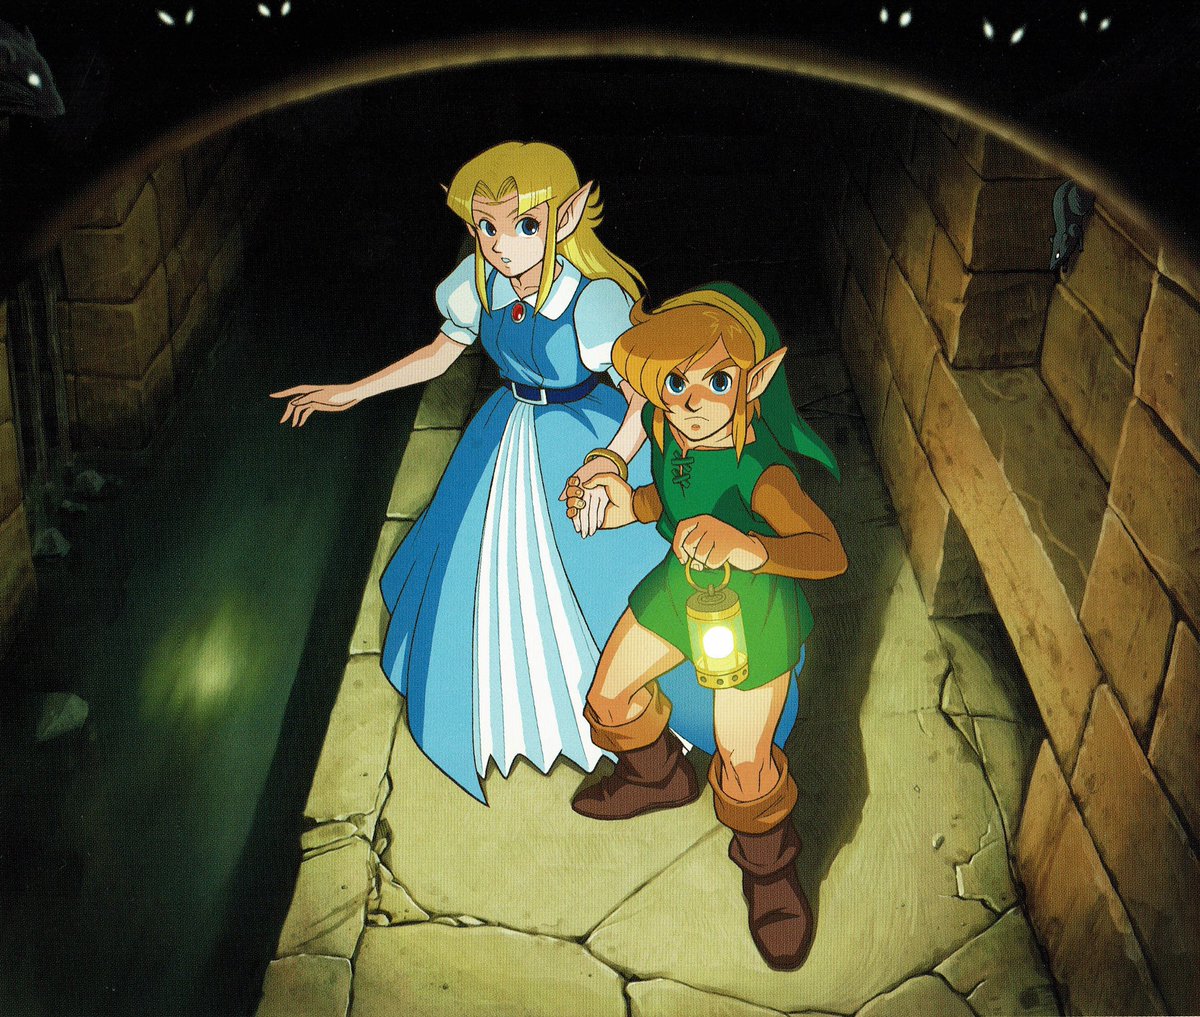 This Viral Video Gives The Legend of Zelda A Perfect Anime